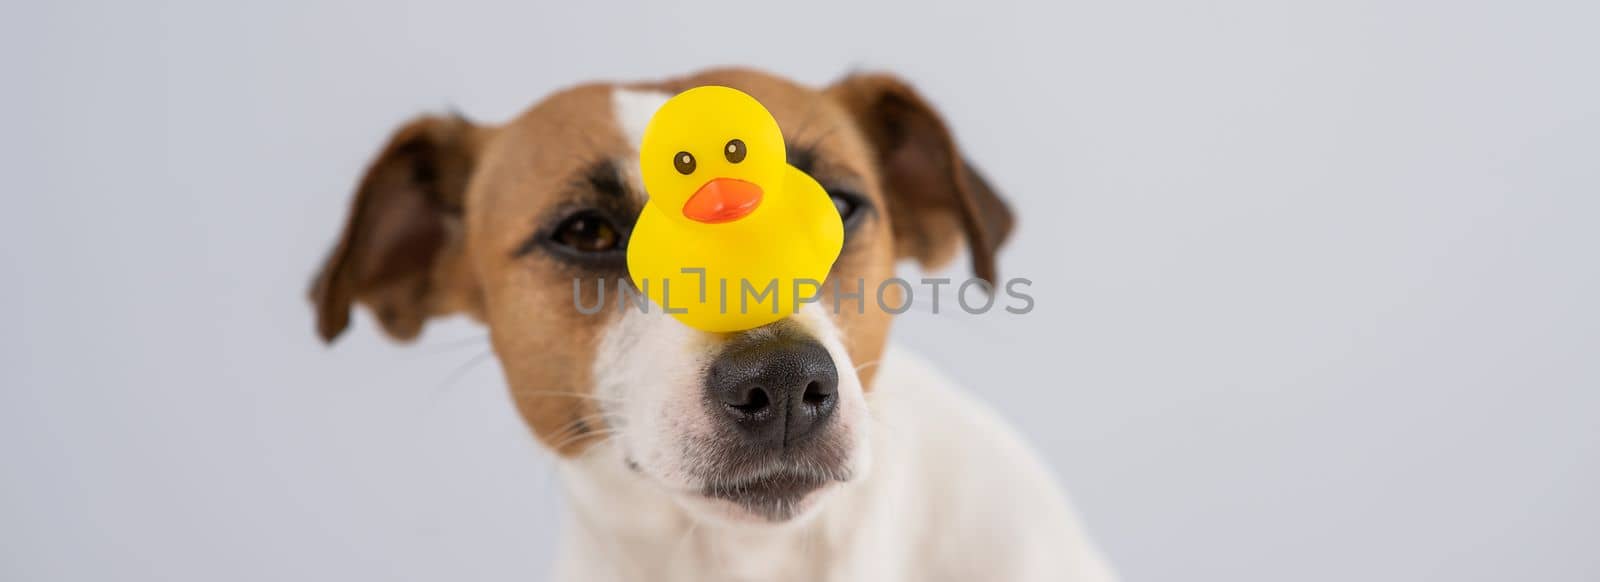 Jack Russell Terrier dog with a rubber duck on his nose